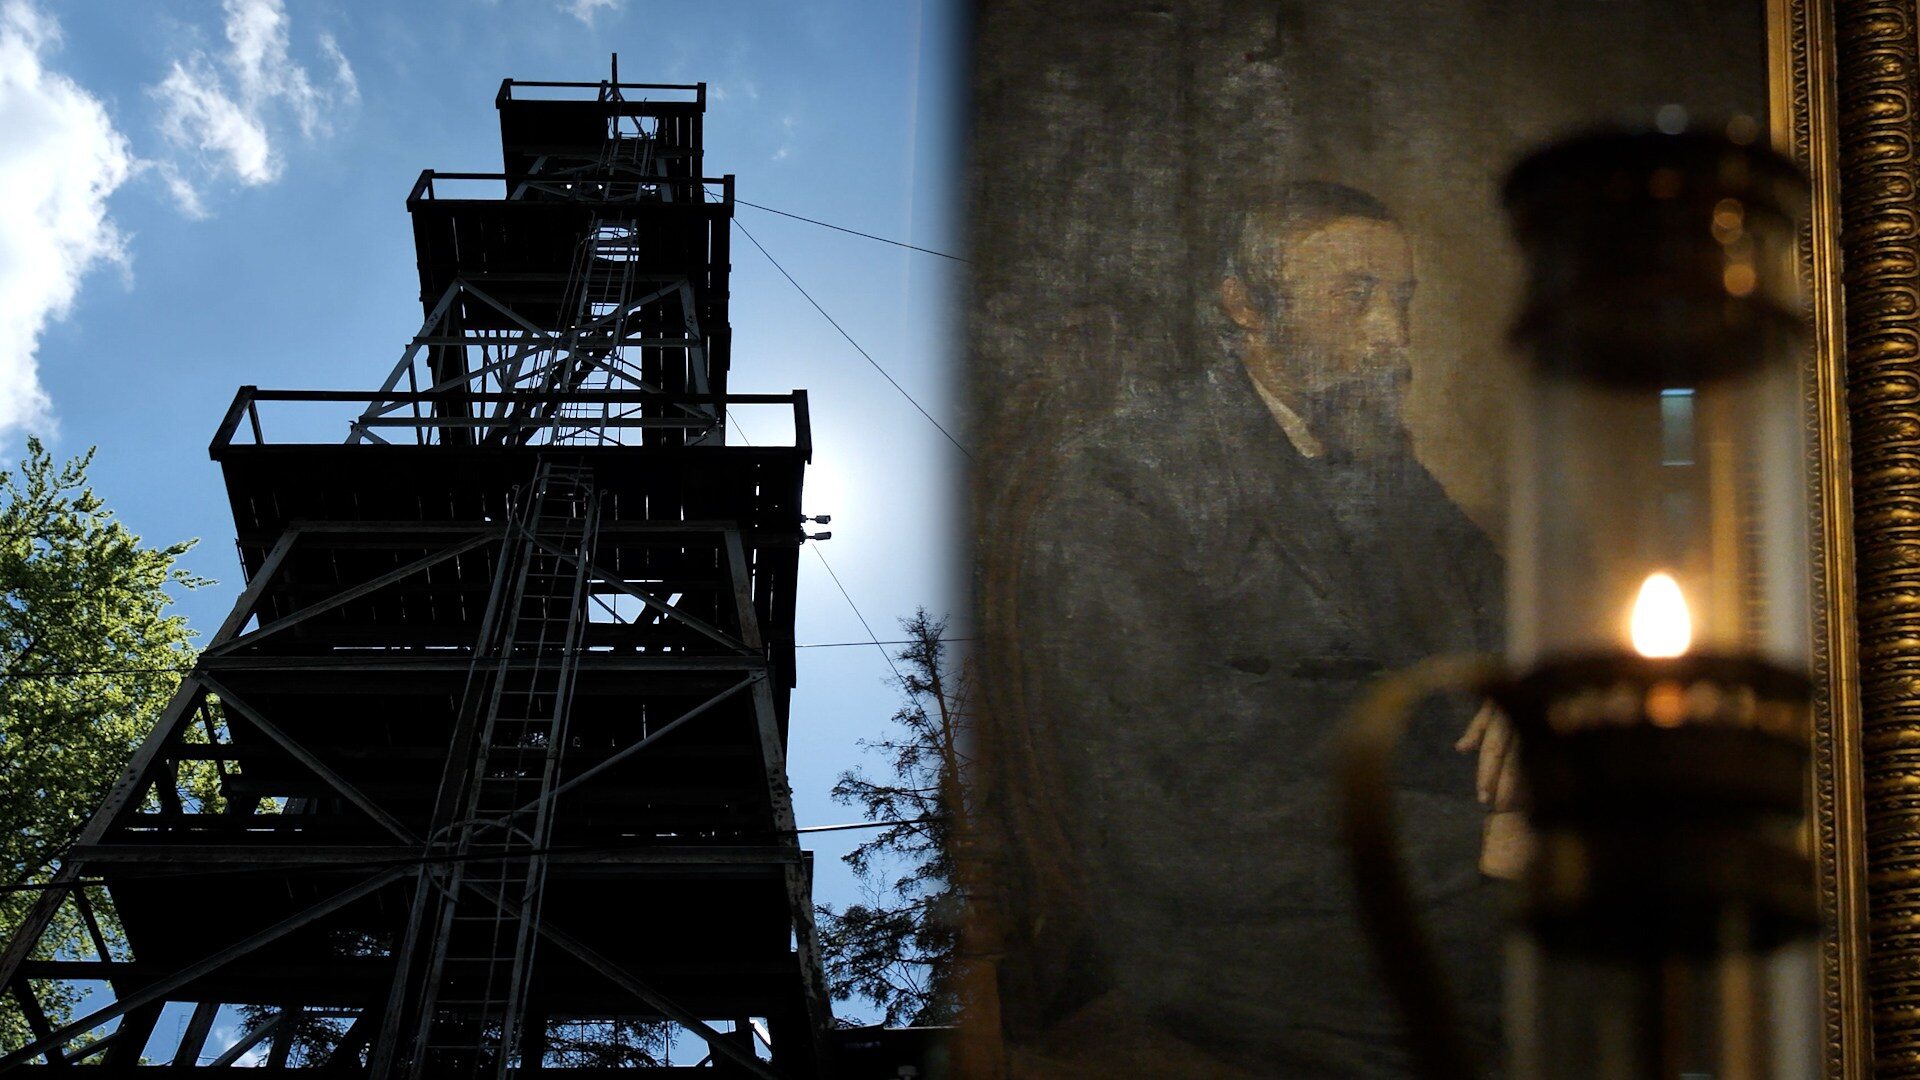 "The Pole who changed the face of the world".  Ignacy Łukasiewicz and the first oil mine